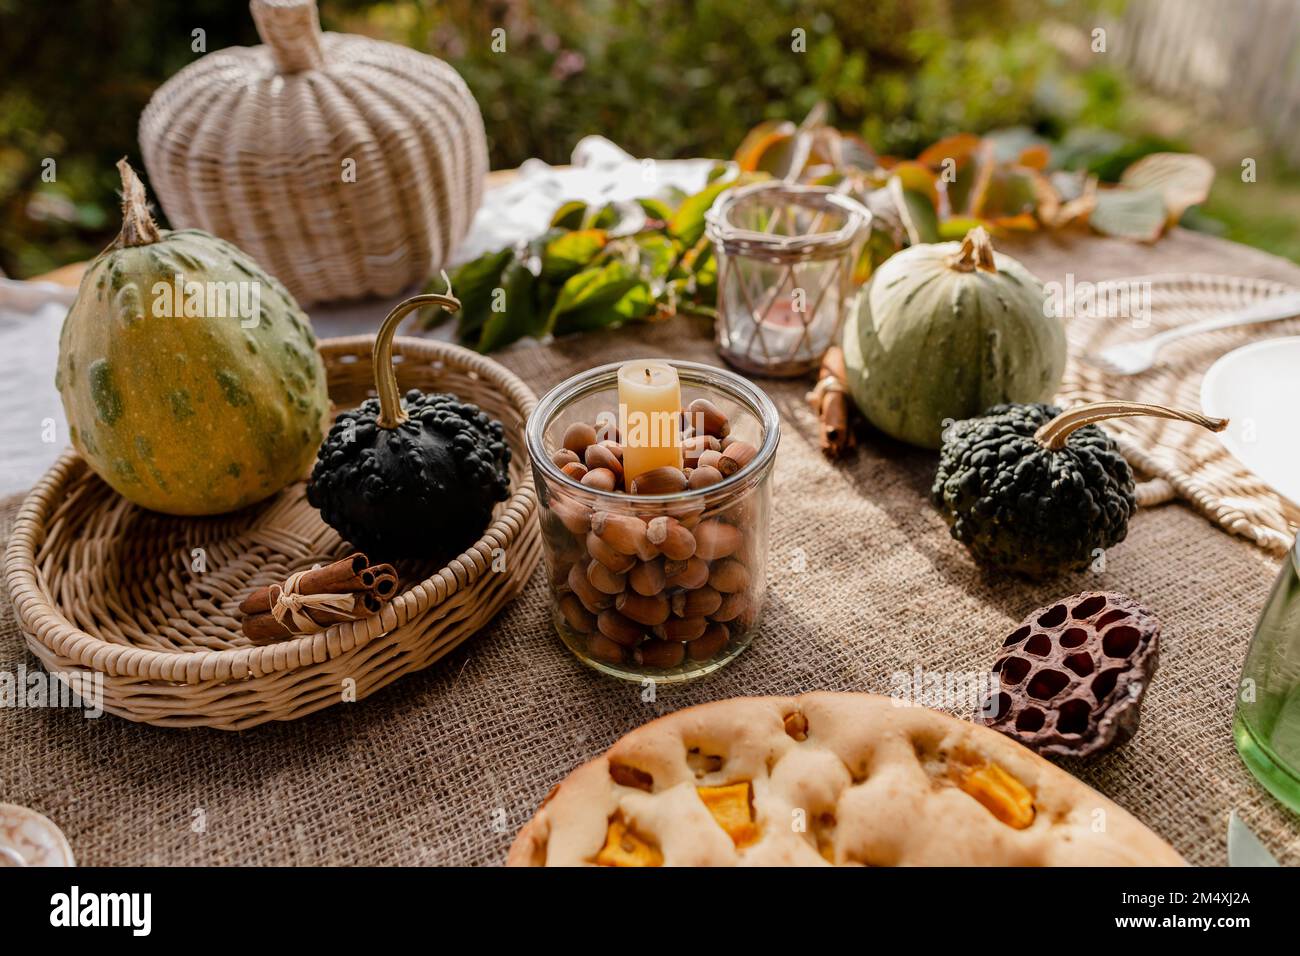 Pumpkin pie, raw pumpkins and jar with hazelnuts lying on outdoor table Stock Photo